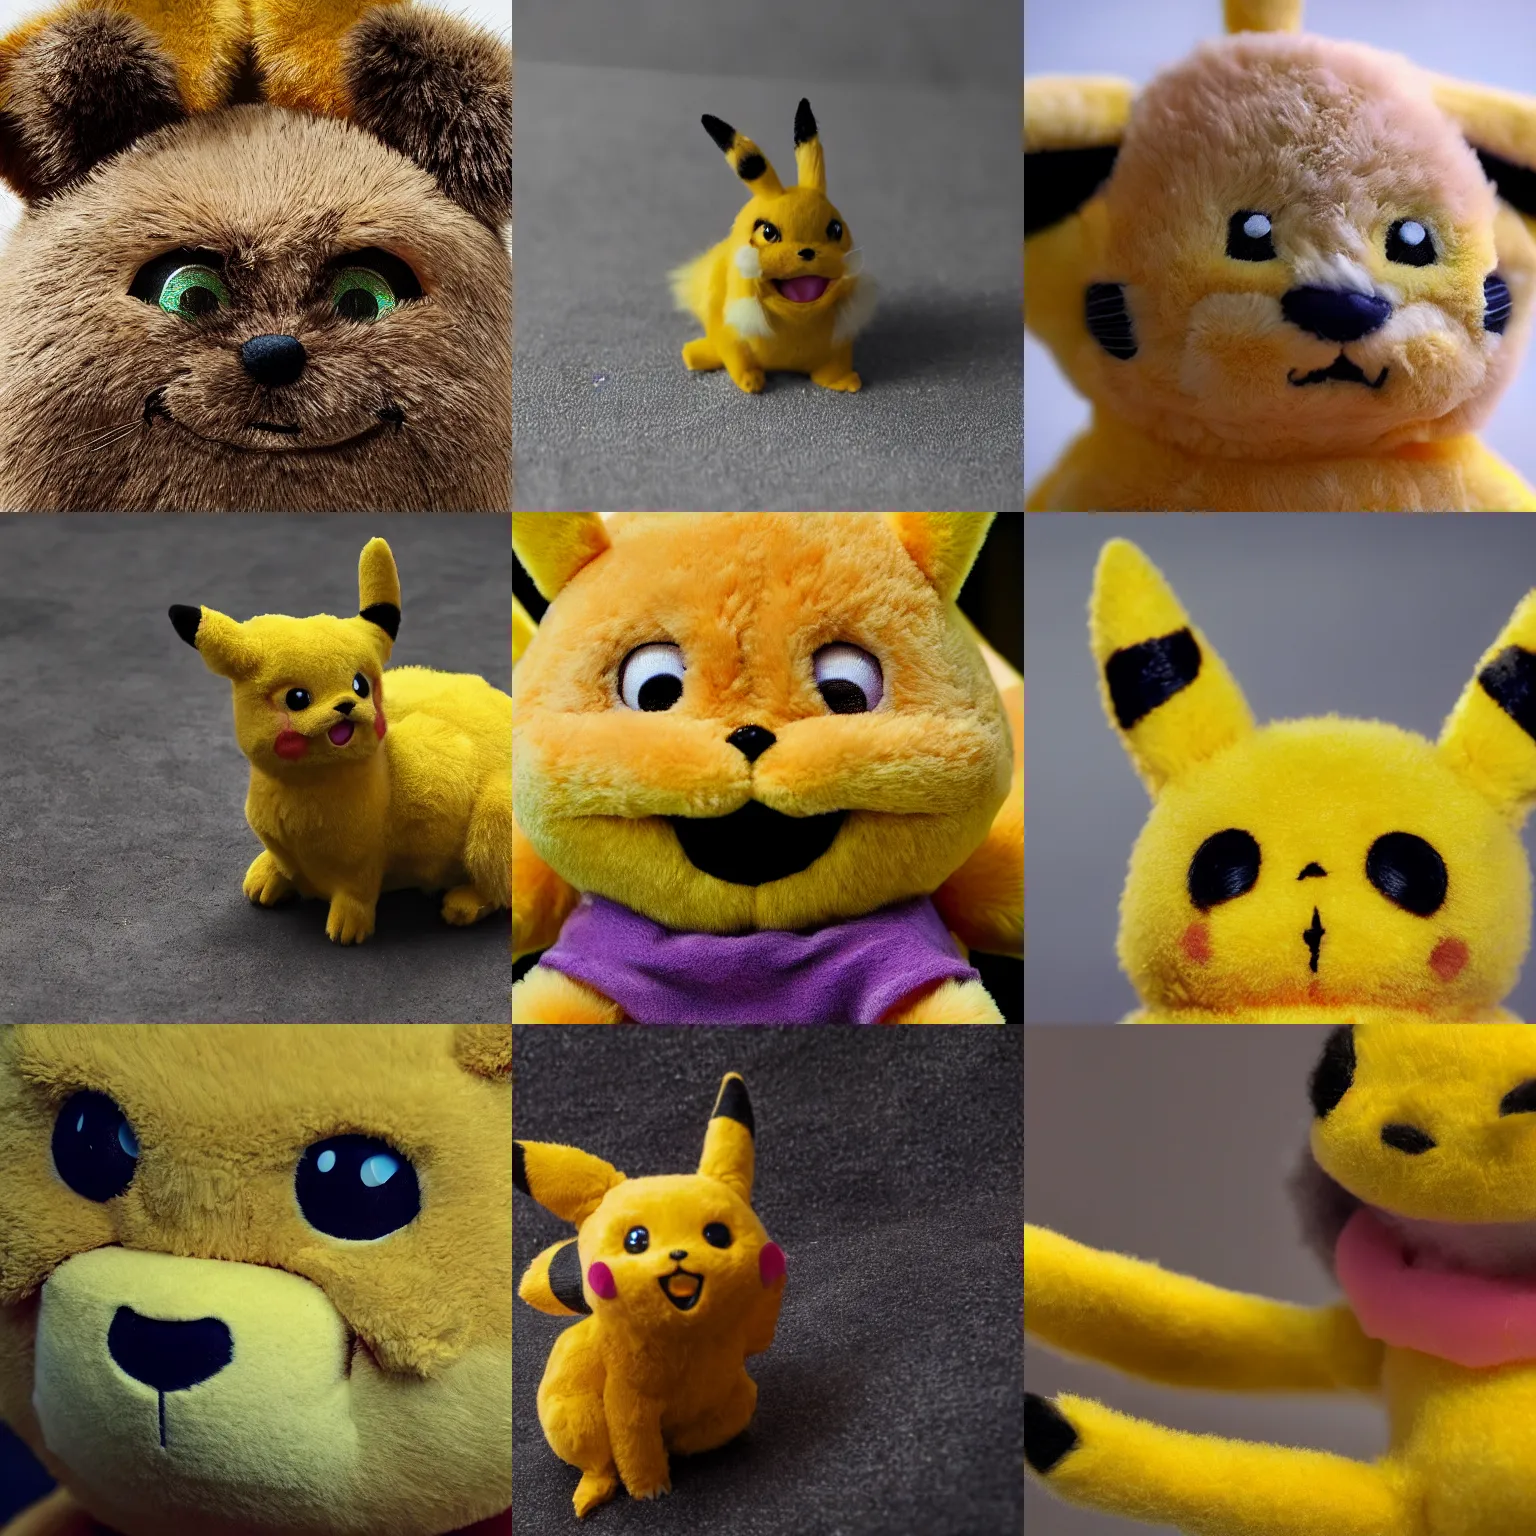 Prompt: A close up macro shot of a furry toy Pikachu, hyper realistic